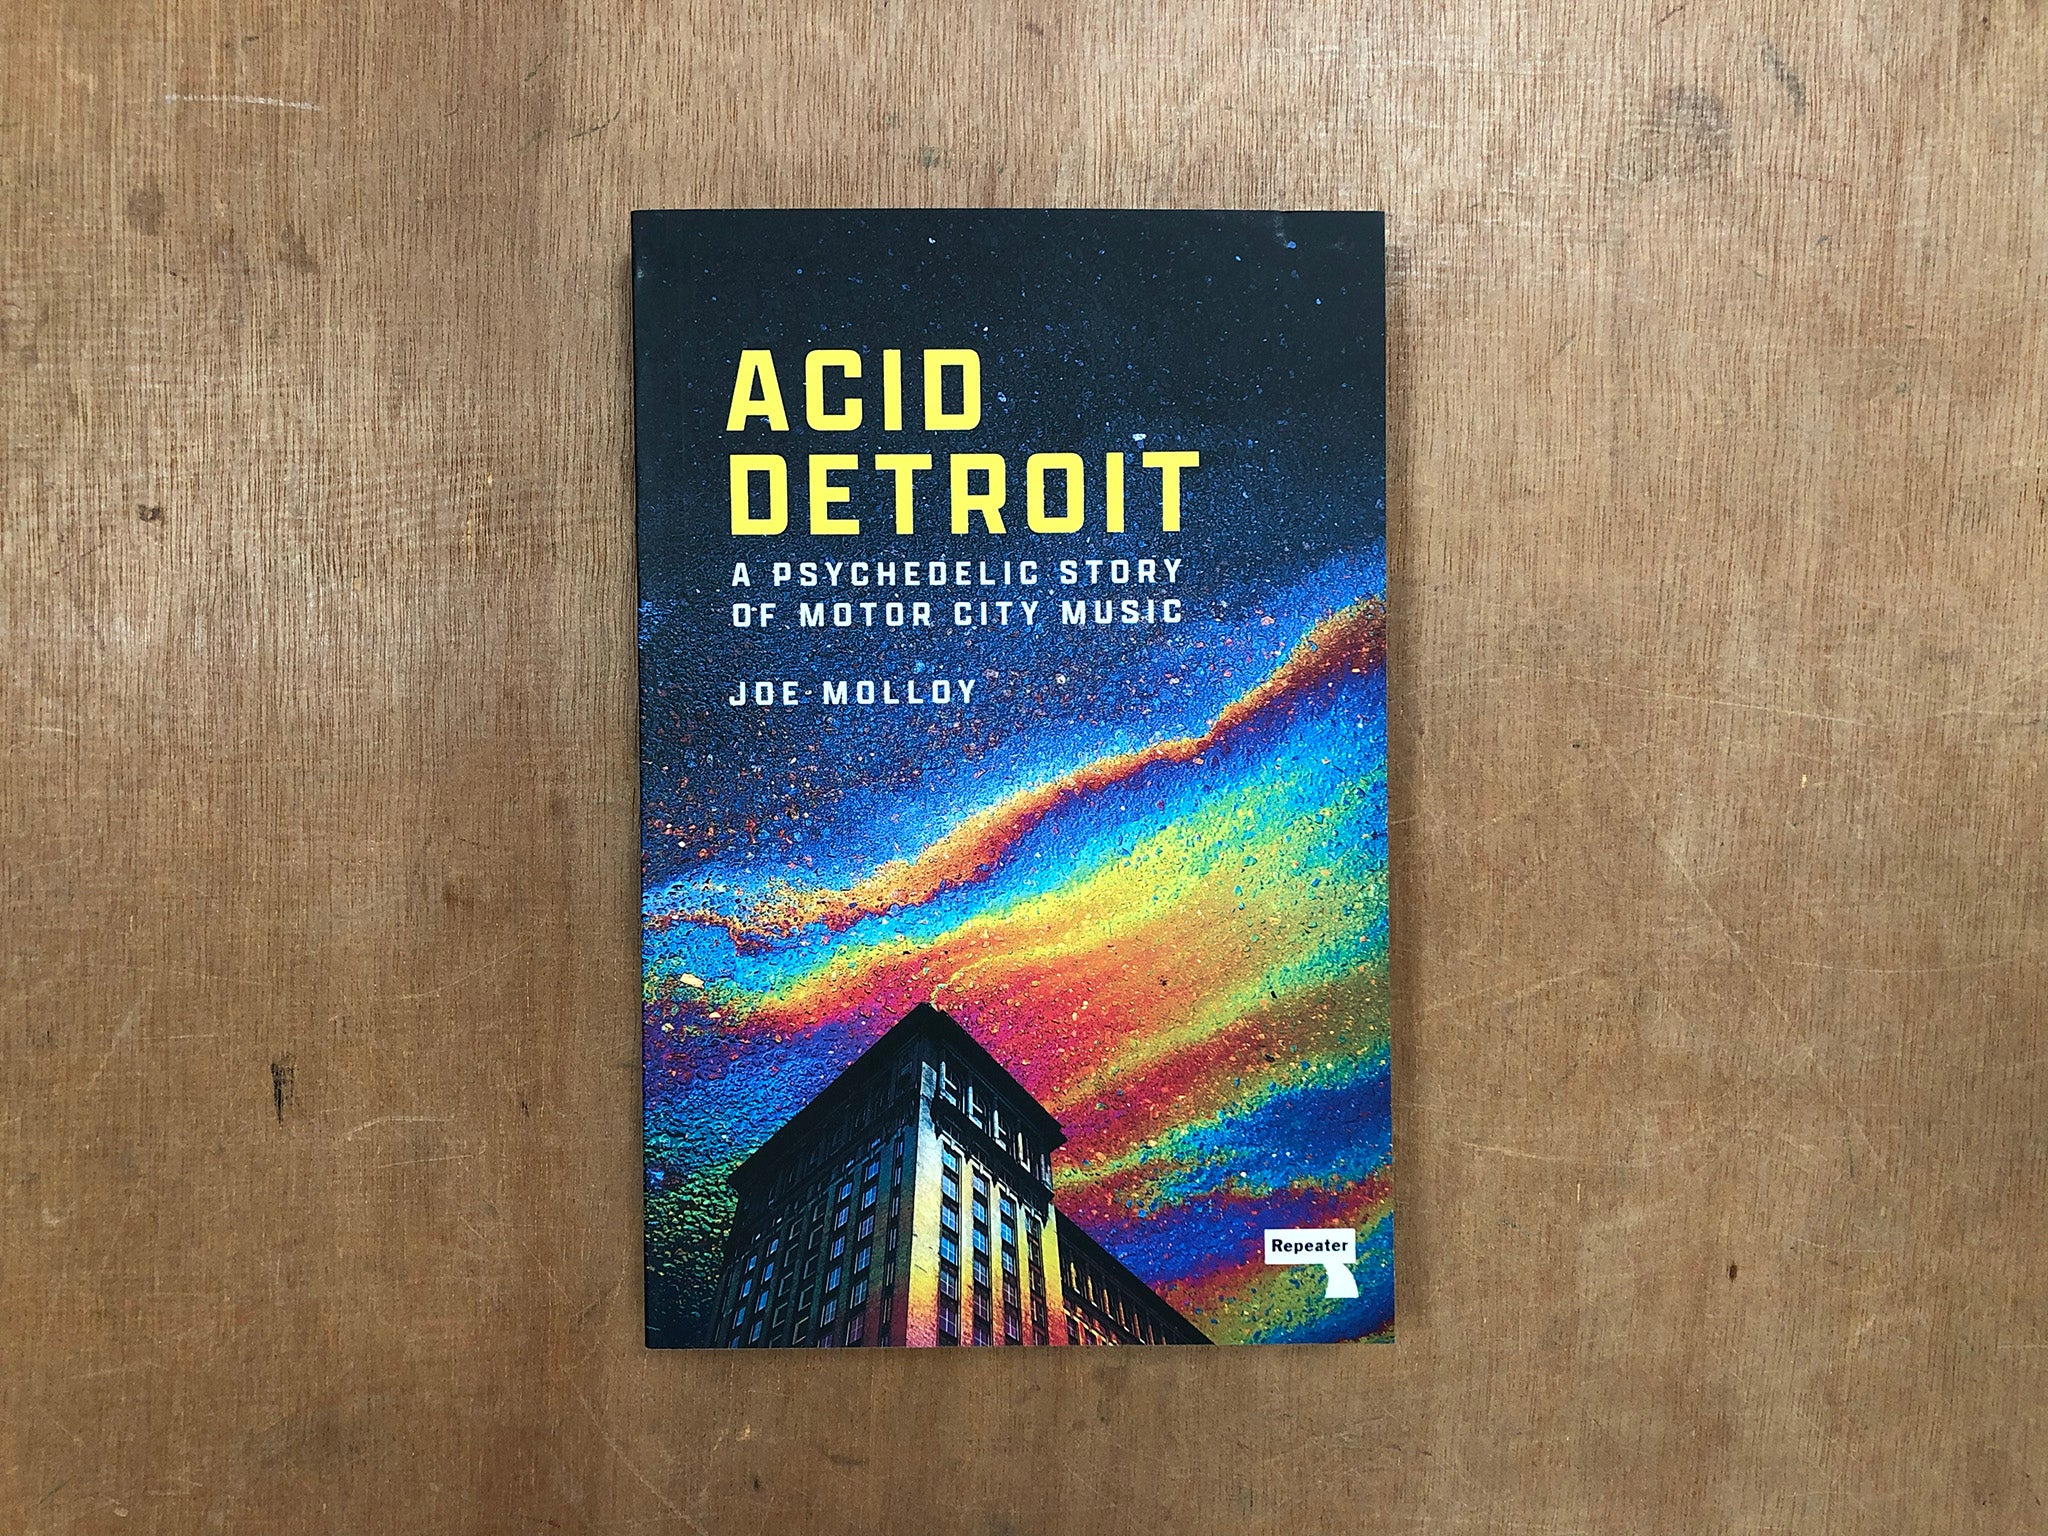 ACID DETROIT: A PSYCHEDELIC STORY OF MOTOR CITY MUSIC by Joe Molloy